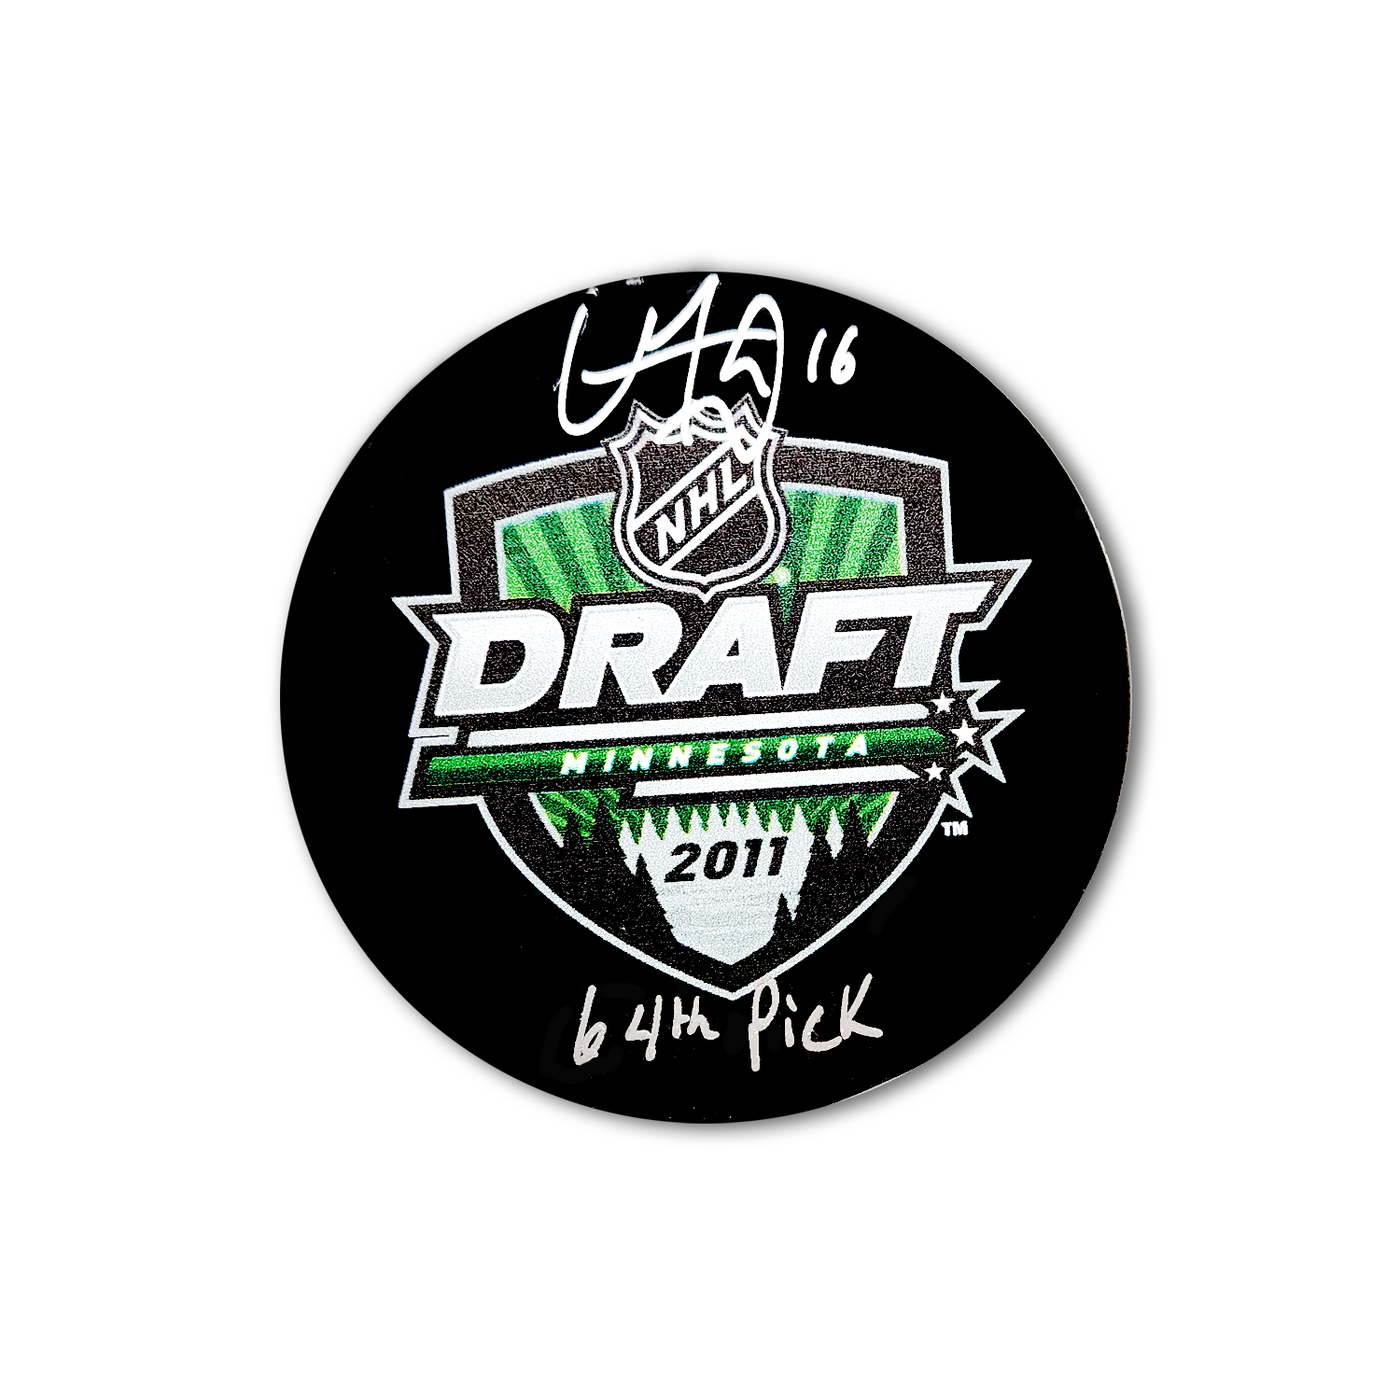 Vincent Trocheck Autographed 2011 NHL Draft Hockey Puck Inscribed 64th Pick